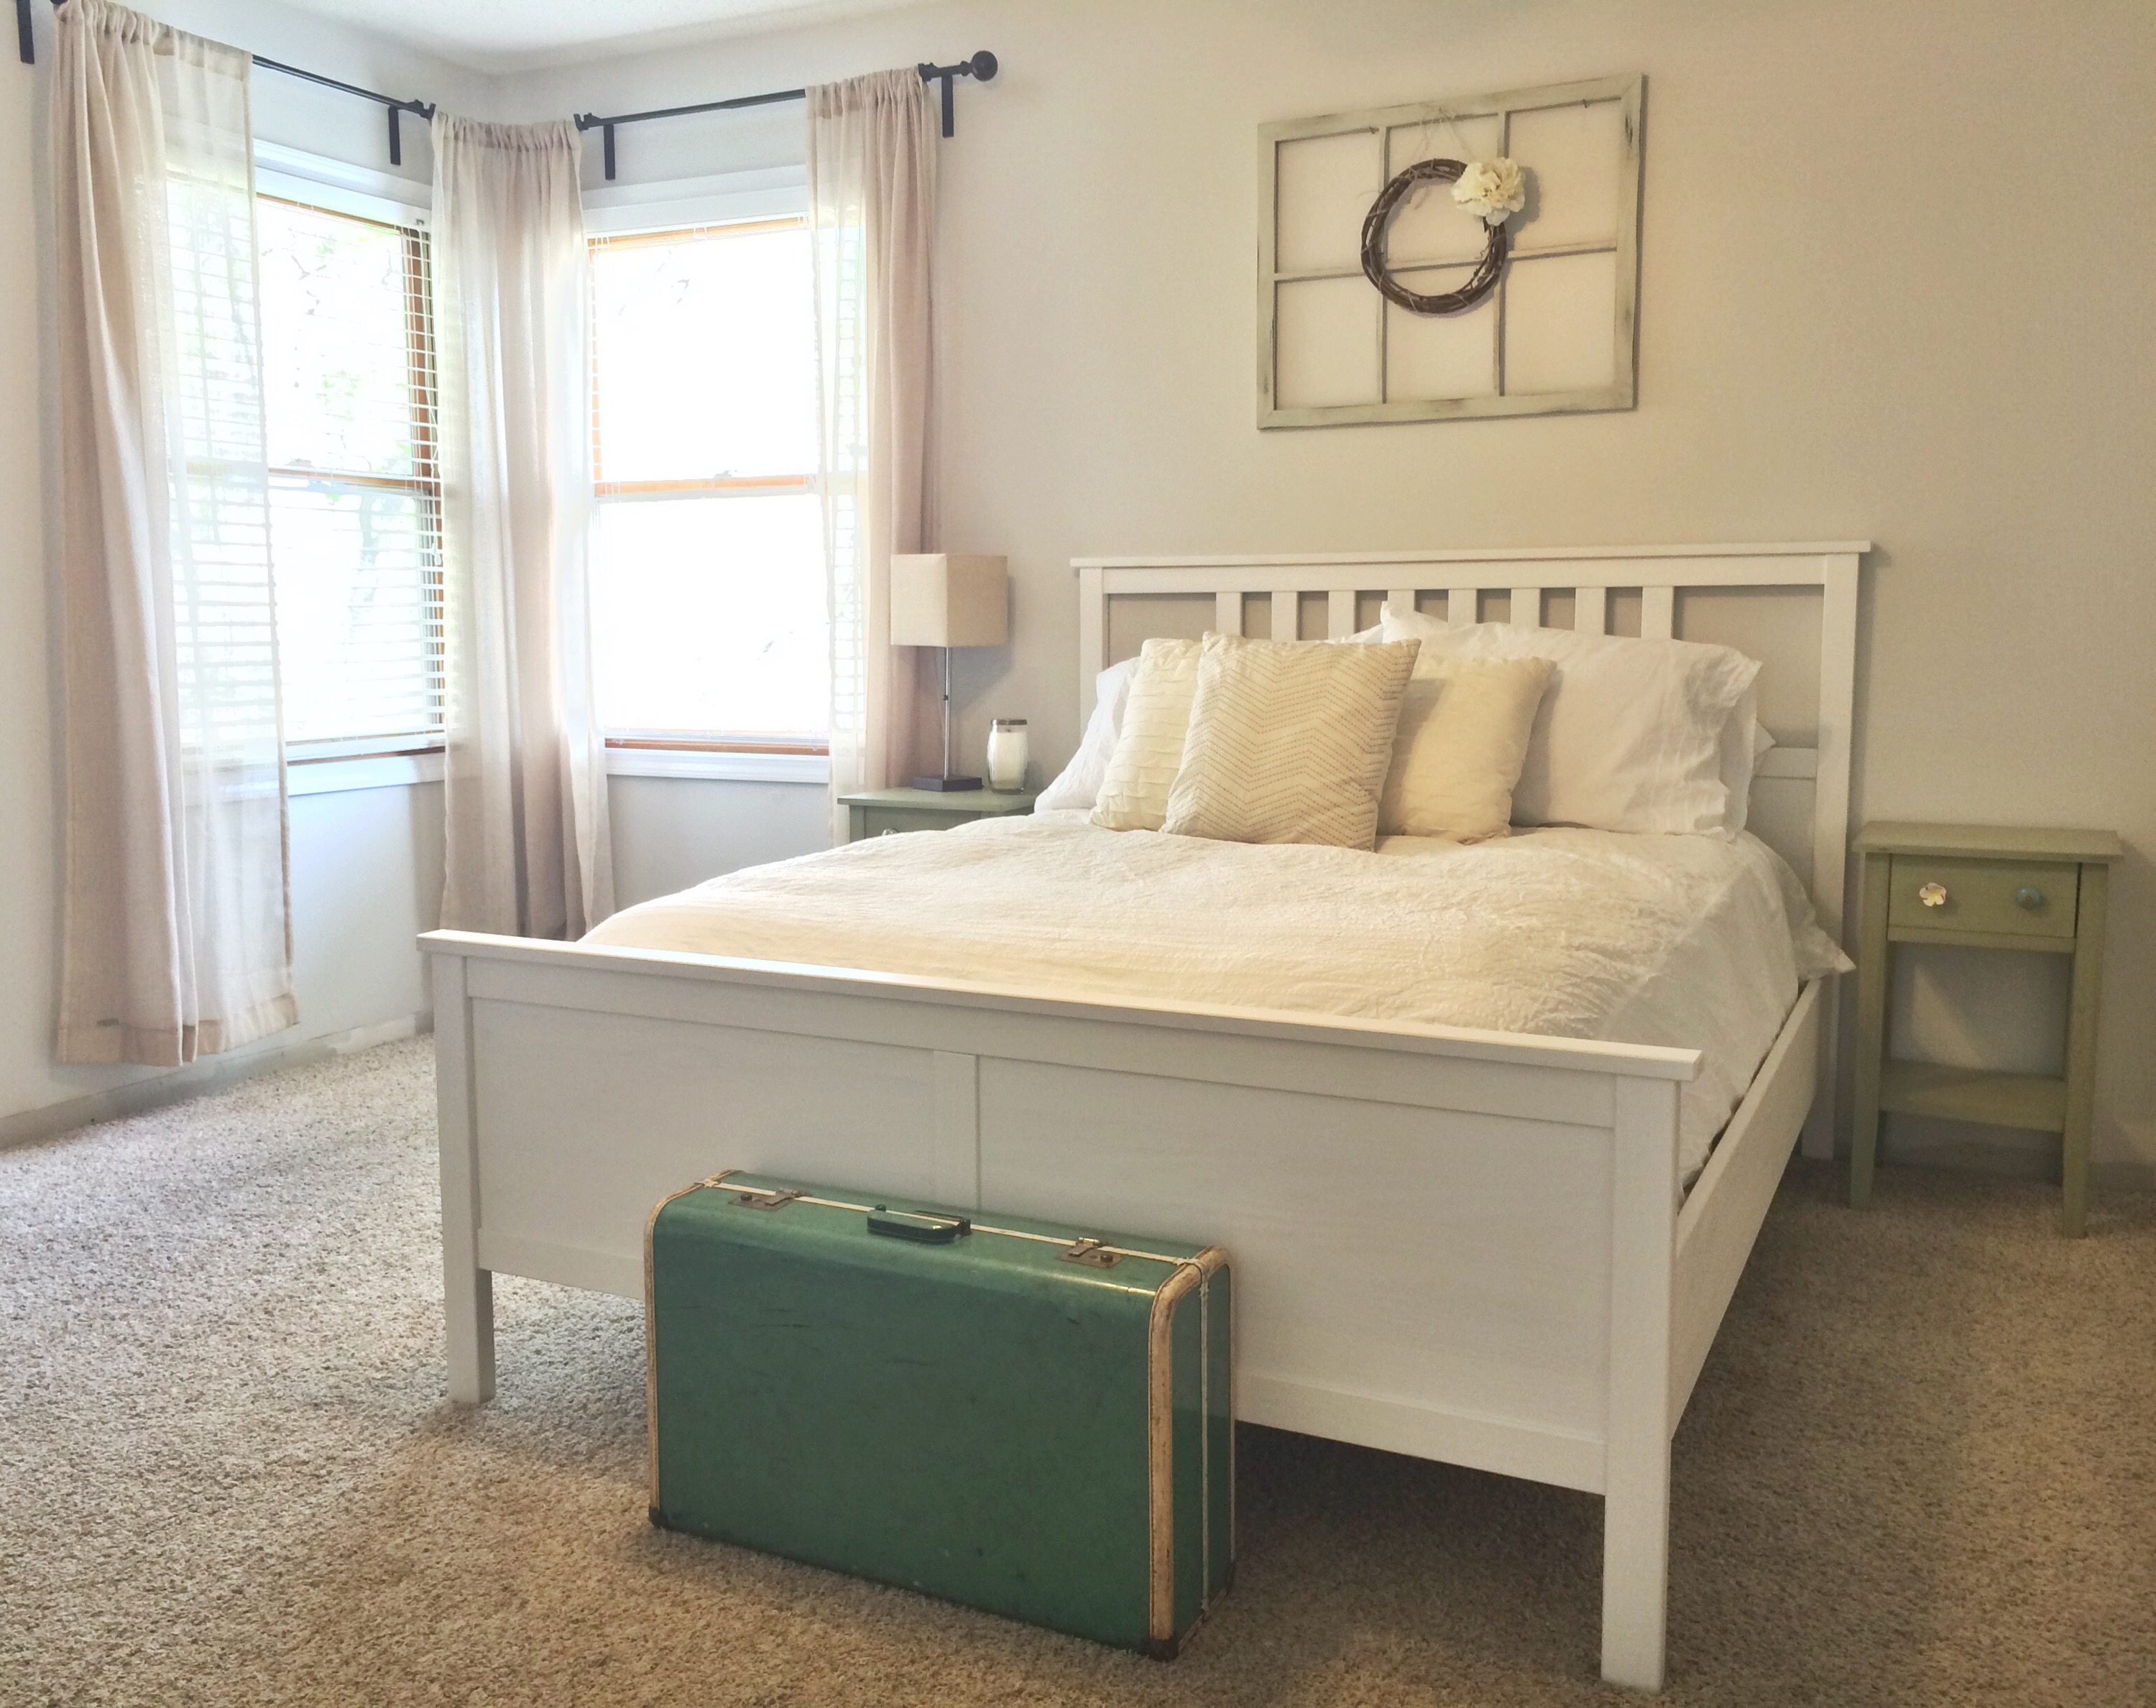 Neutral guest room, white Ikea bed, Behr Silver Drop walls, vintage suitcase, vintage window with wreath